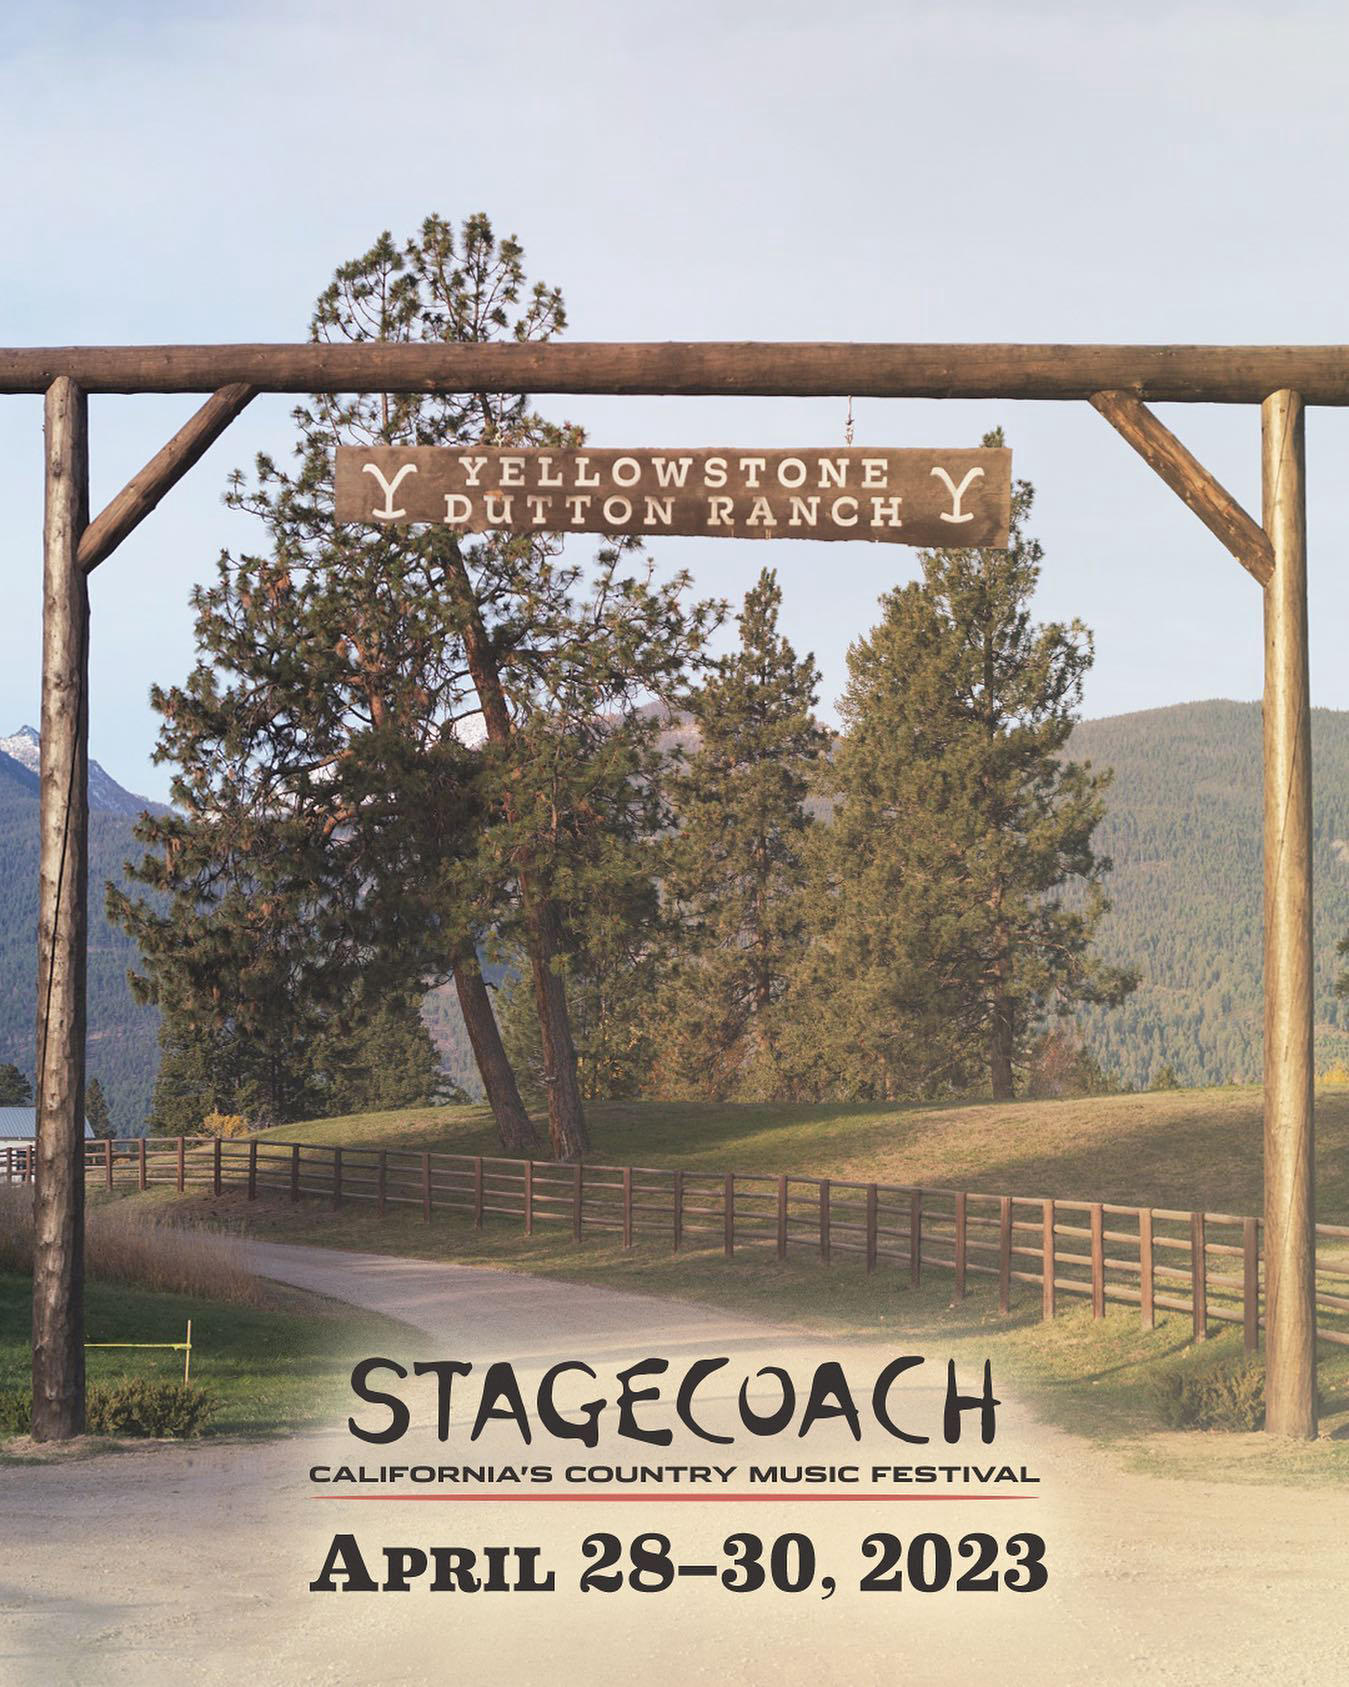 image  1 The #Yellowstone Dutton Ranch is hitting the road and relocating to California’s  #Stagecoach Festiv